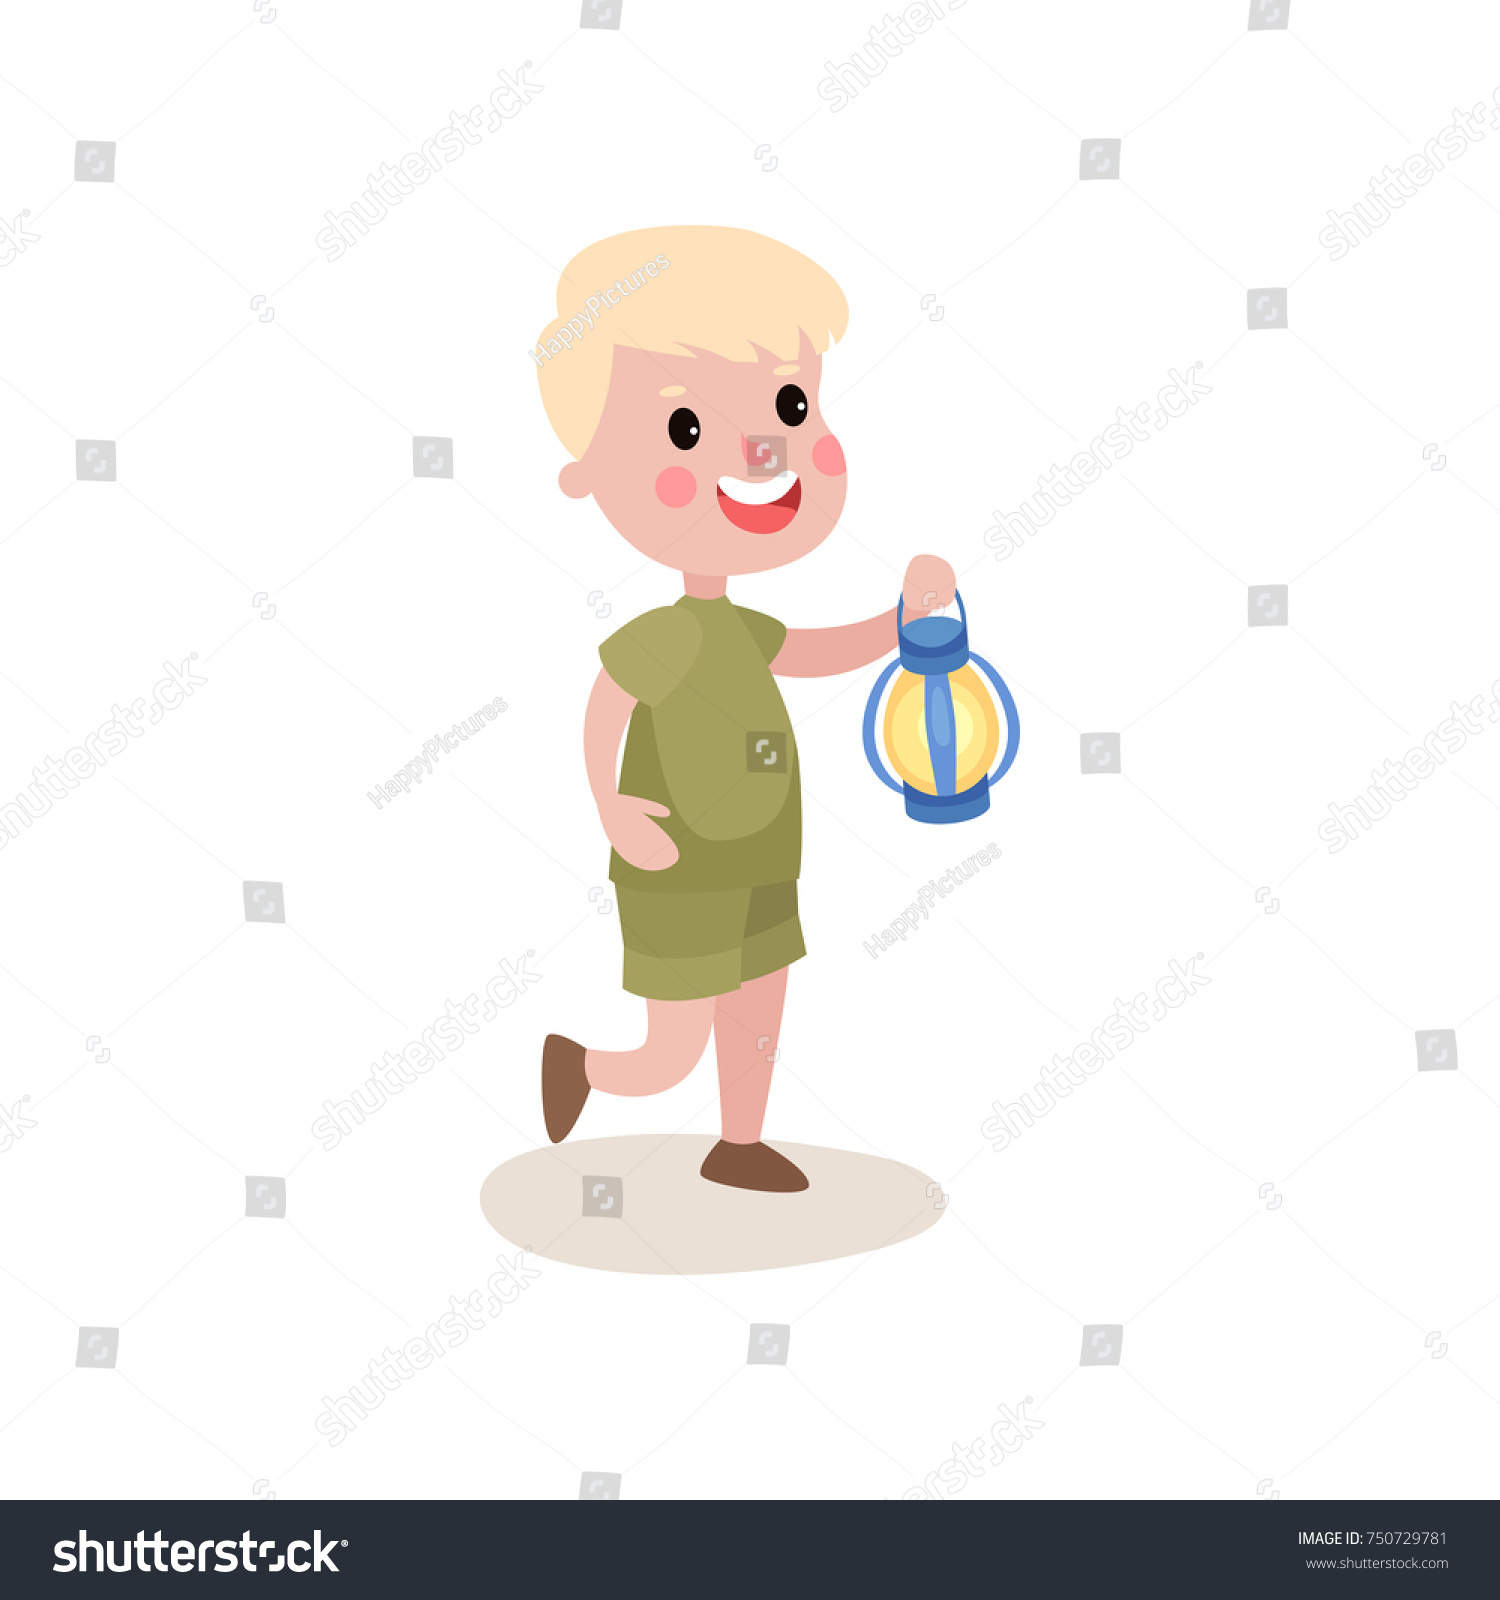 SVG of Little blond kid walking with coleman lantern in his hand, summer camp activities svg